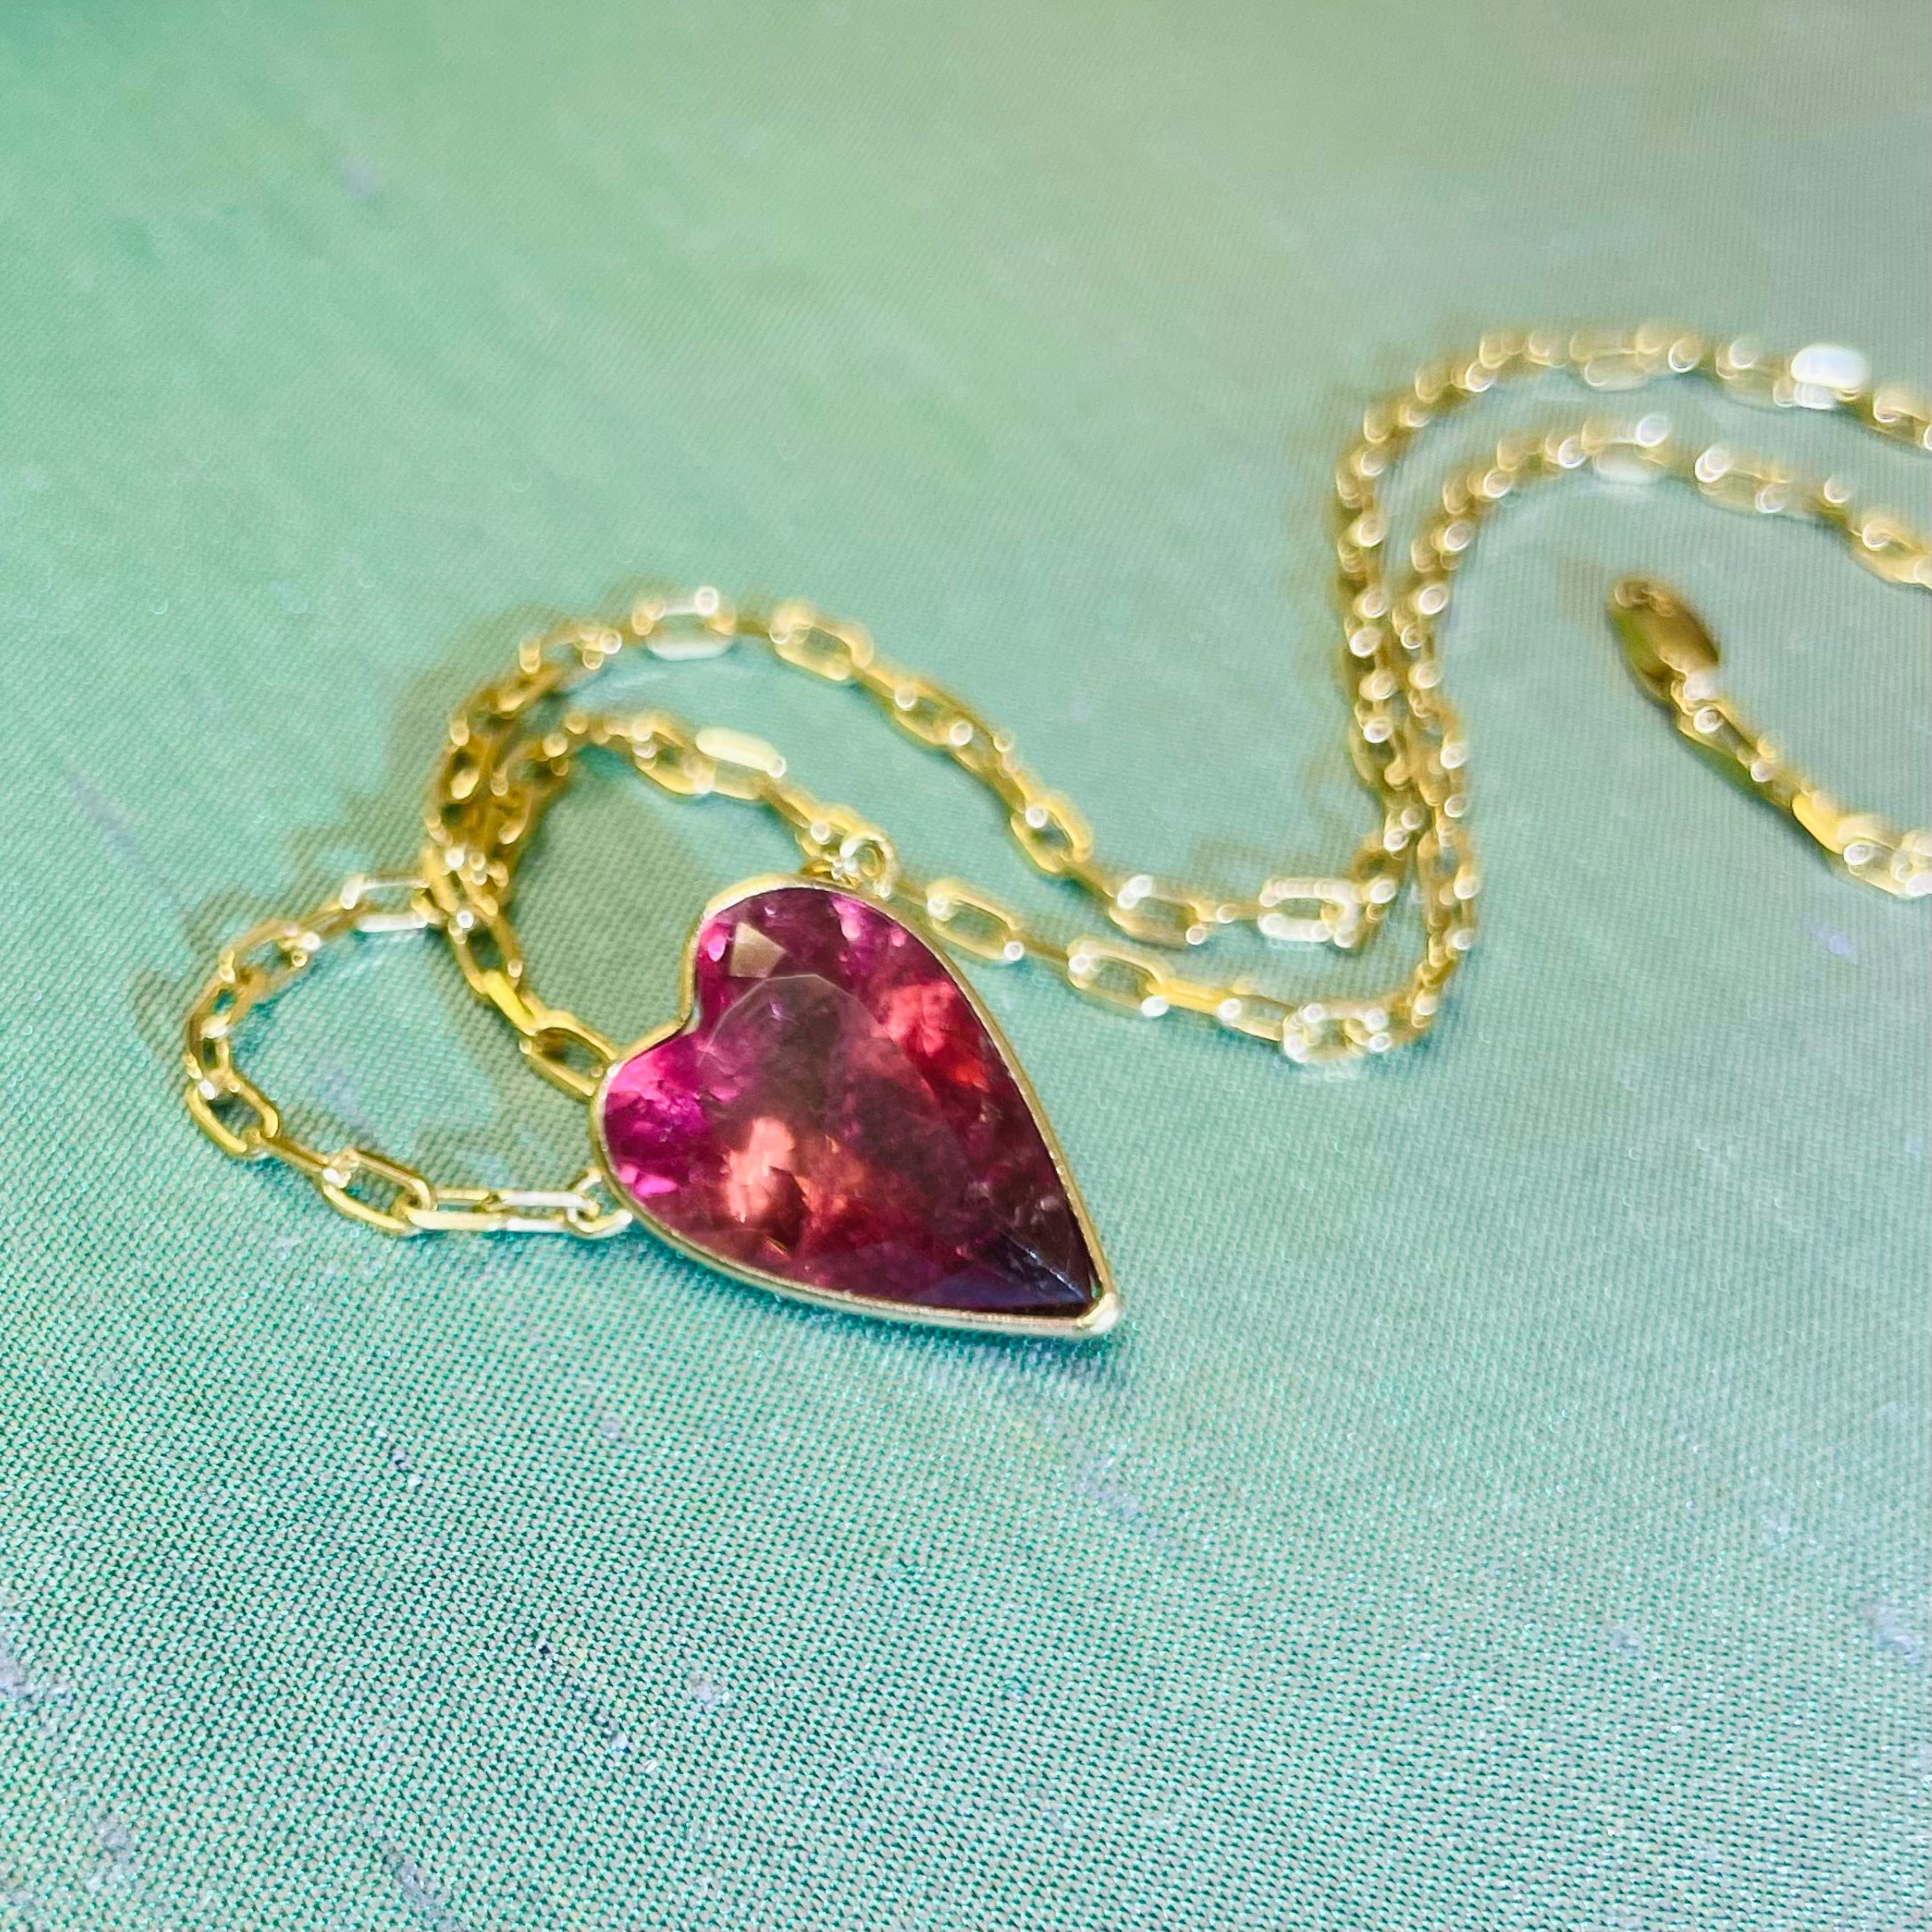 9CT Natural Reddish Pink Tourmaline Heart Solitaire Necklace Pendant 18K Yellow